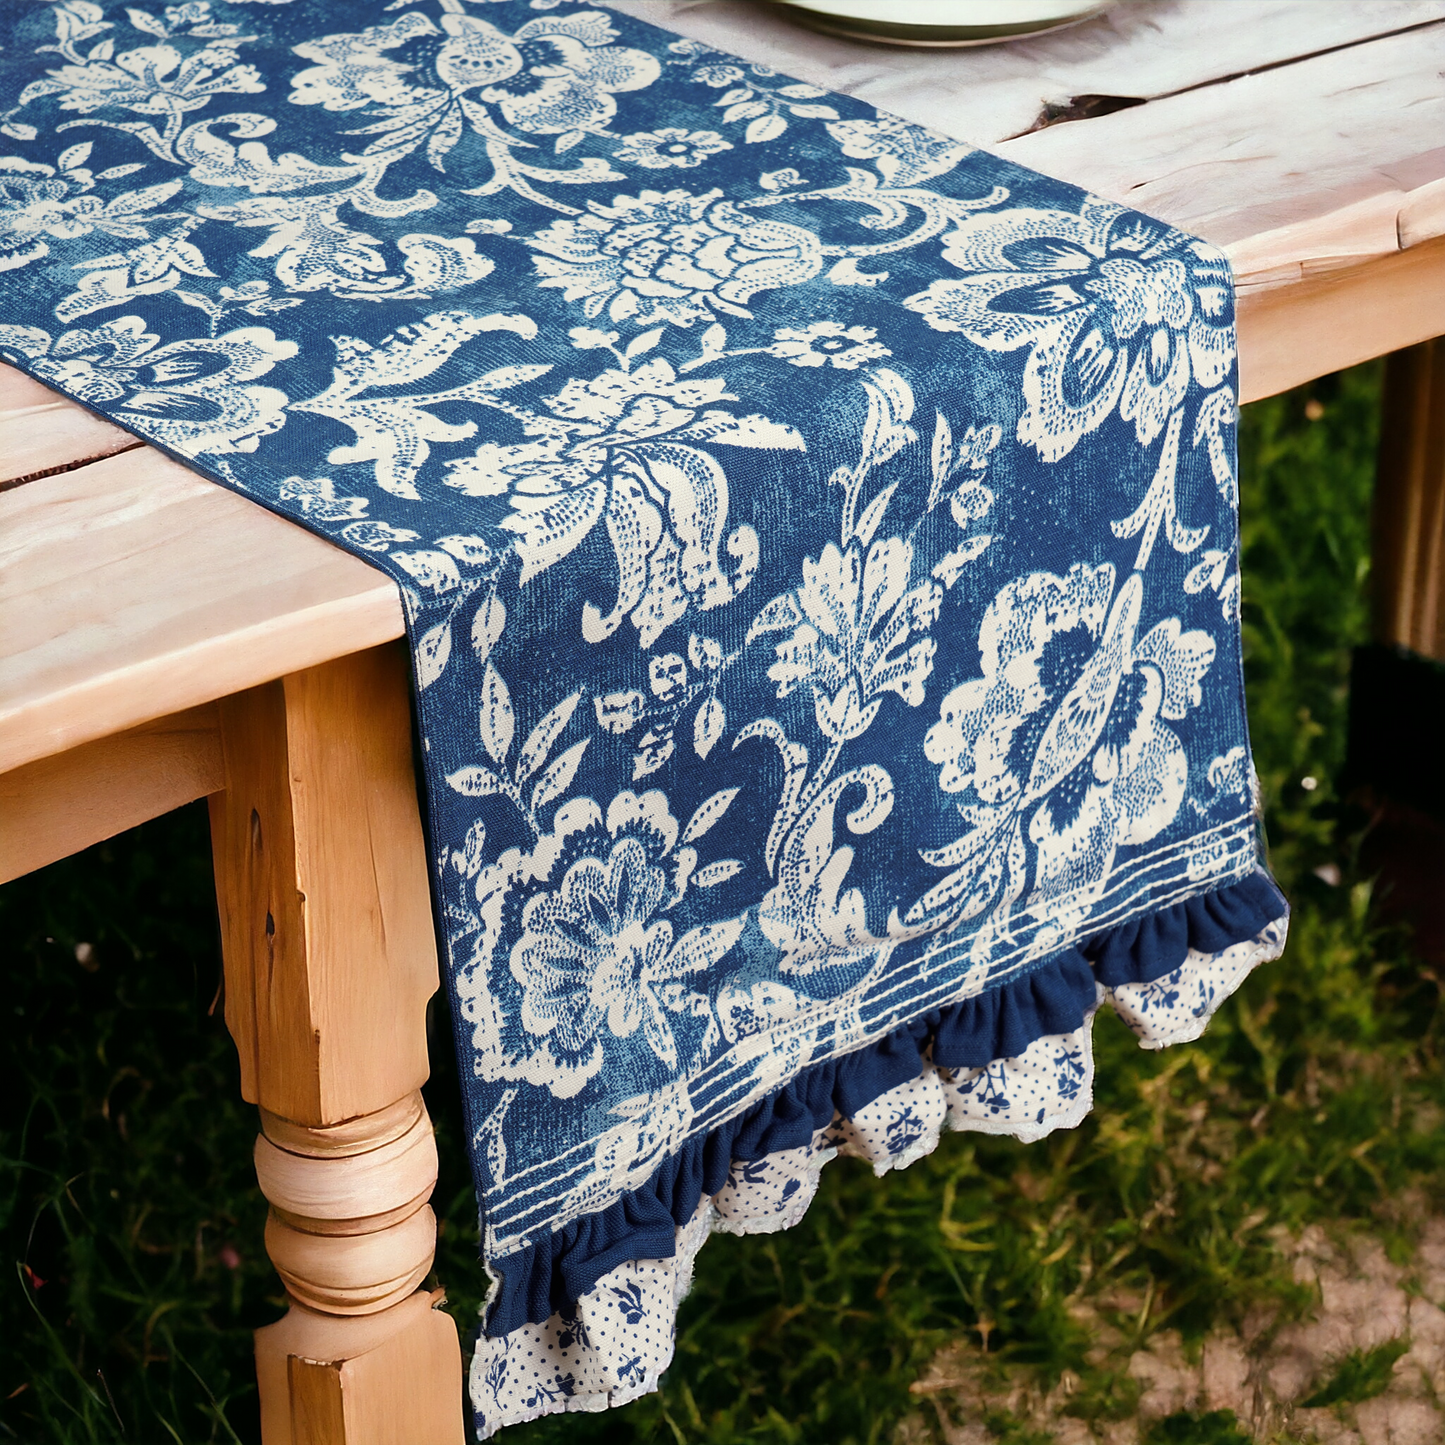 Indigo Blue cotton table runner, bold floral block print with frill border, table decor, sizes available